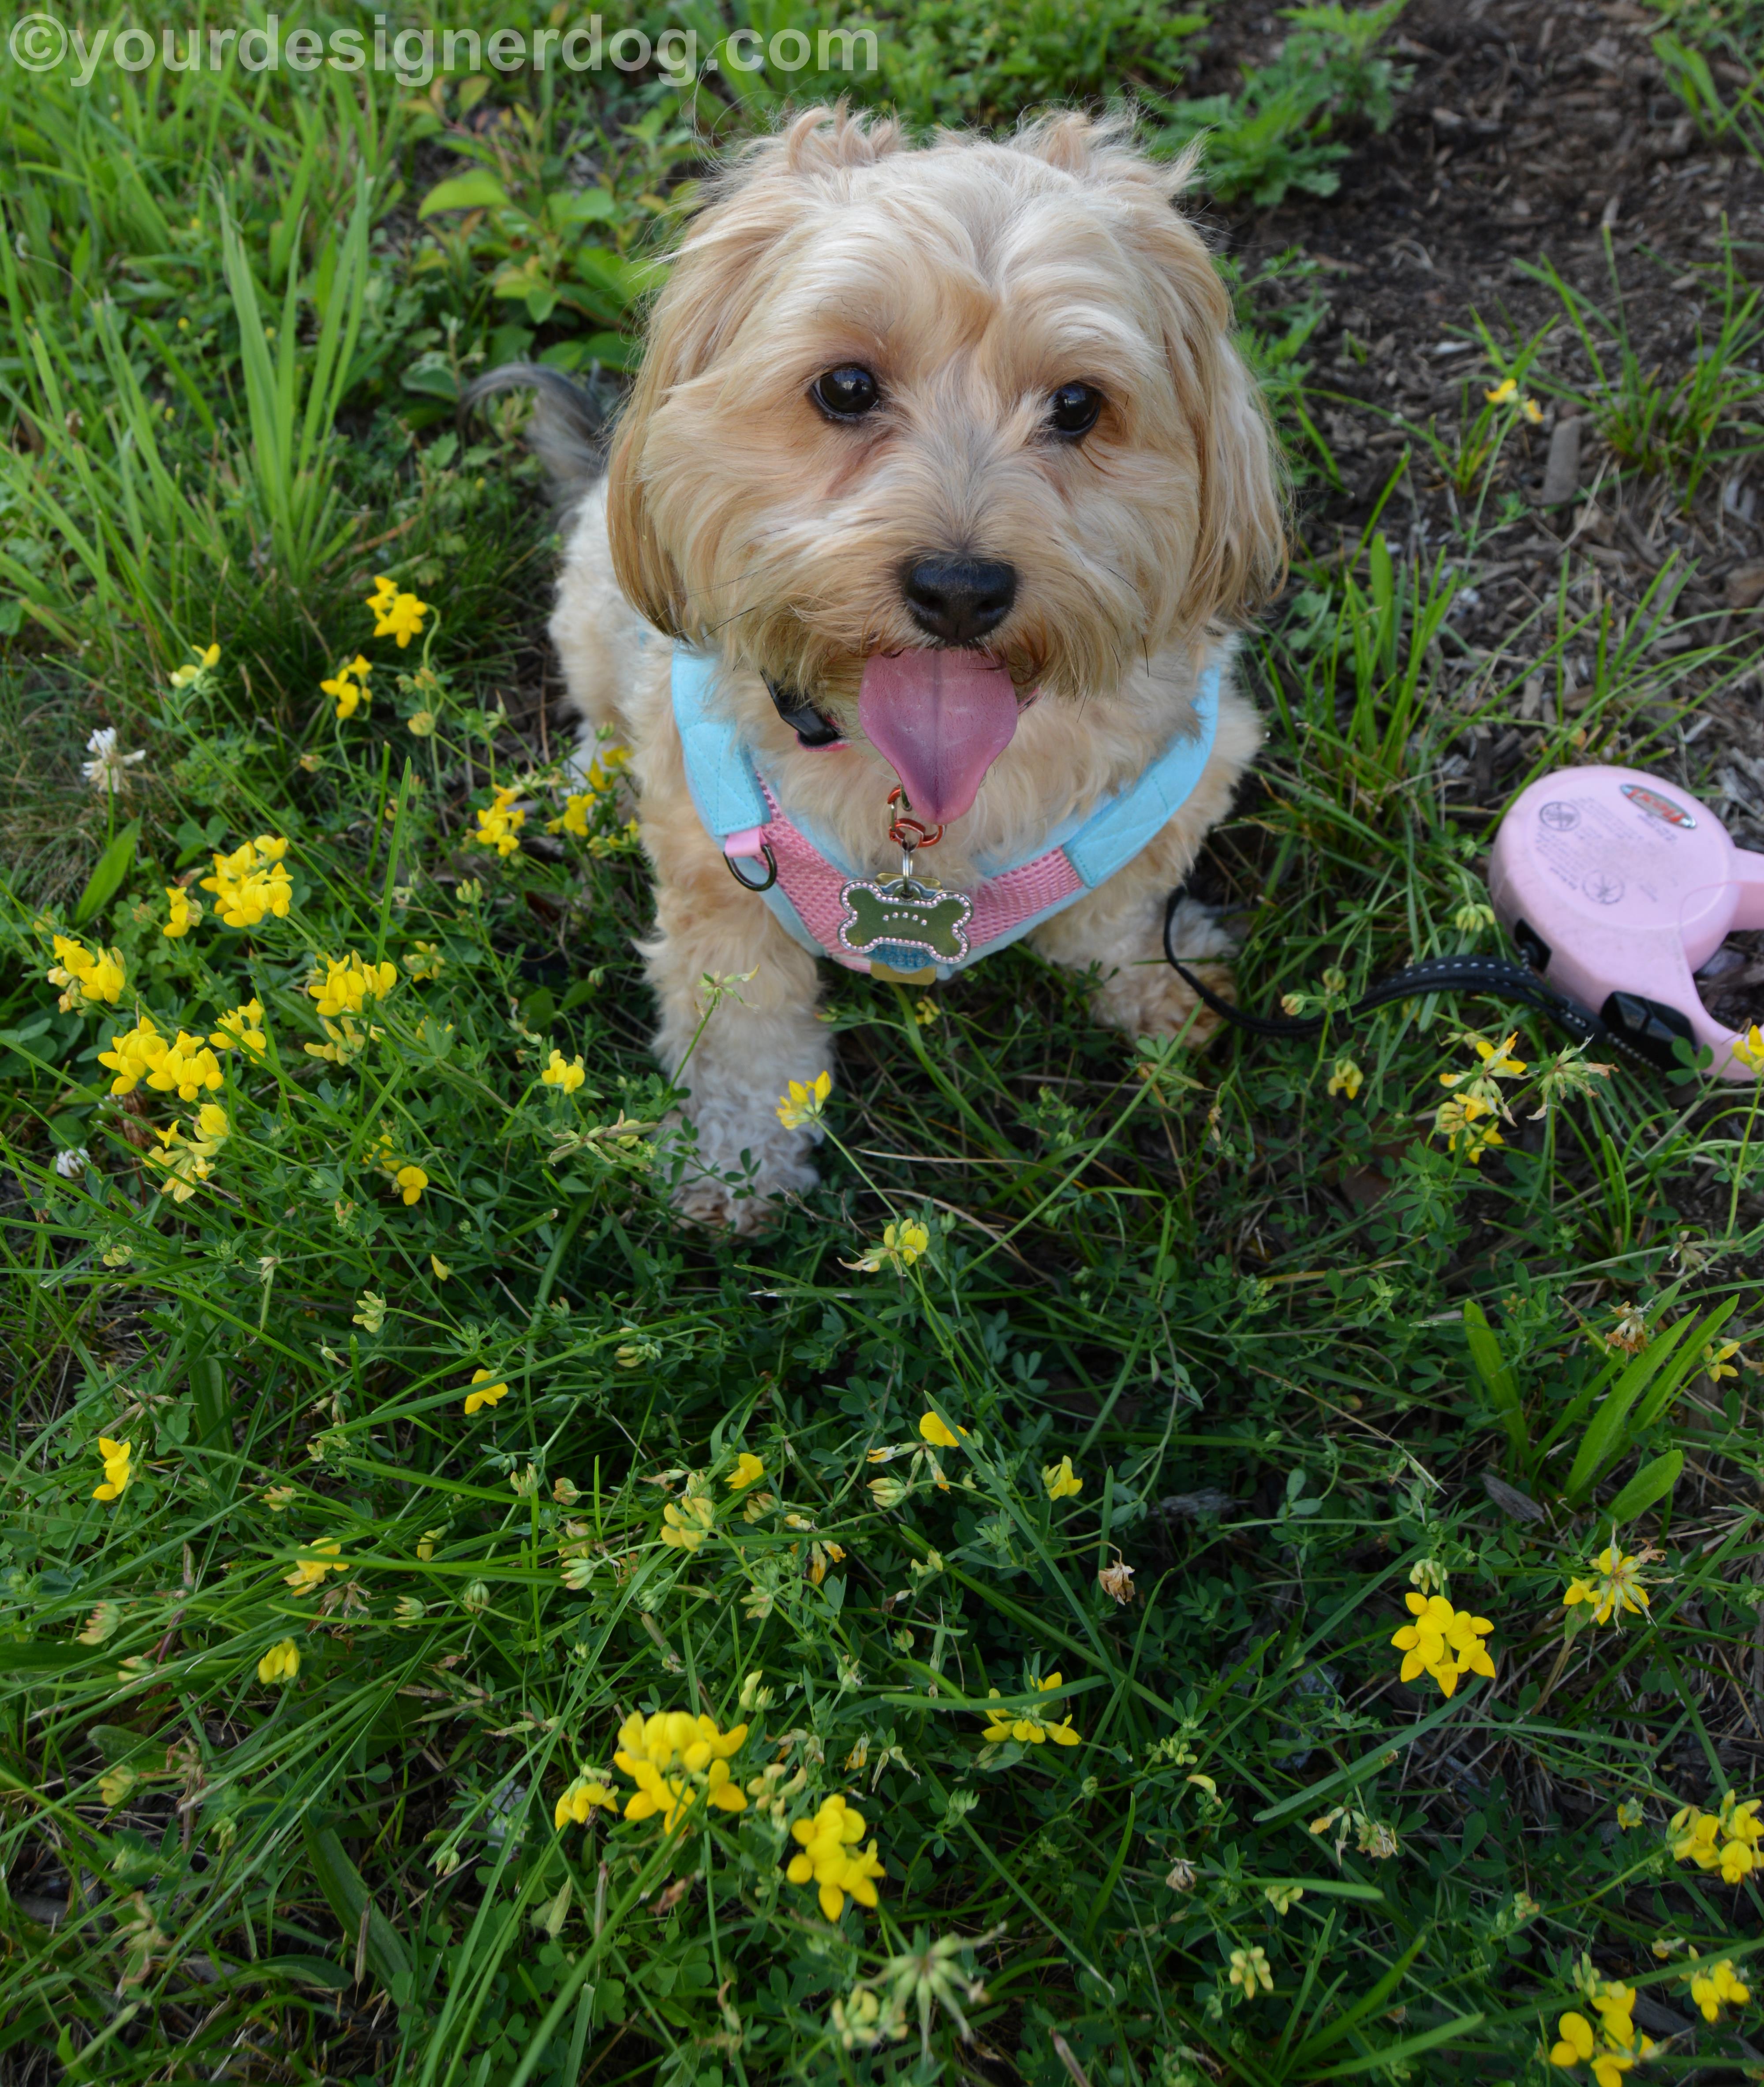 dogs, designer dogs, Yorkipoo, yorkie poo, tongue out, wildflowers